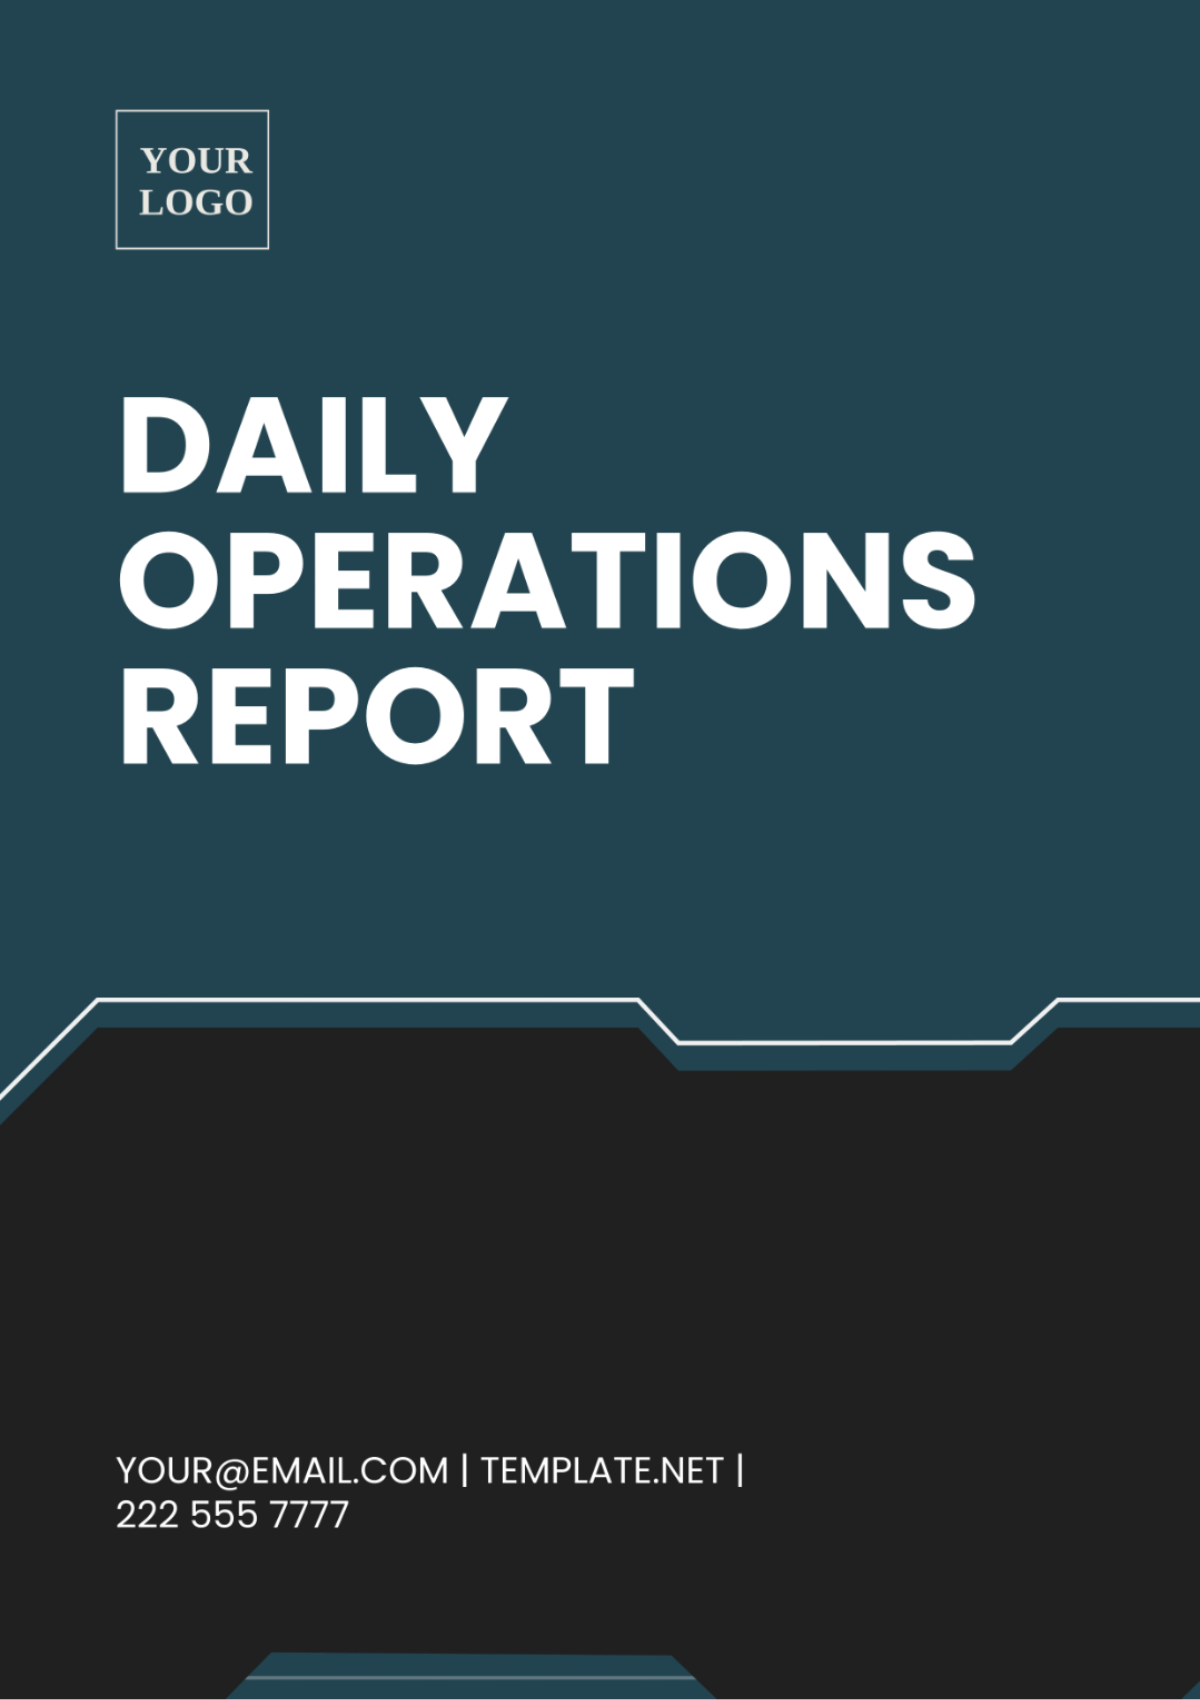 Free Daily Operations Report Template